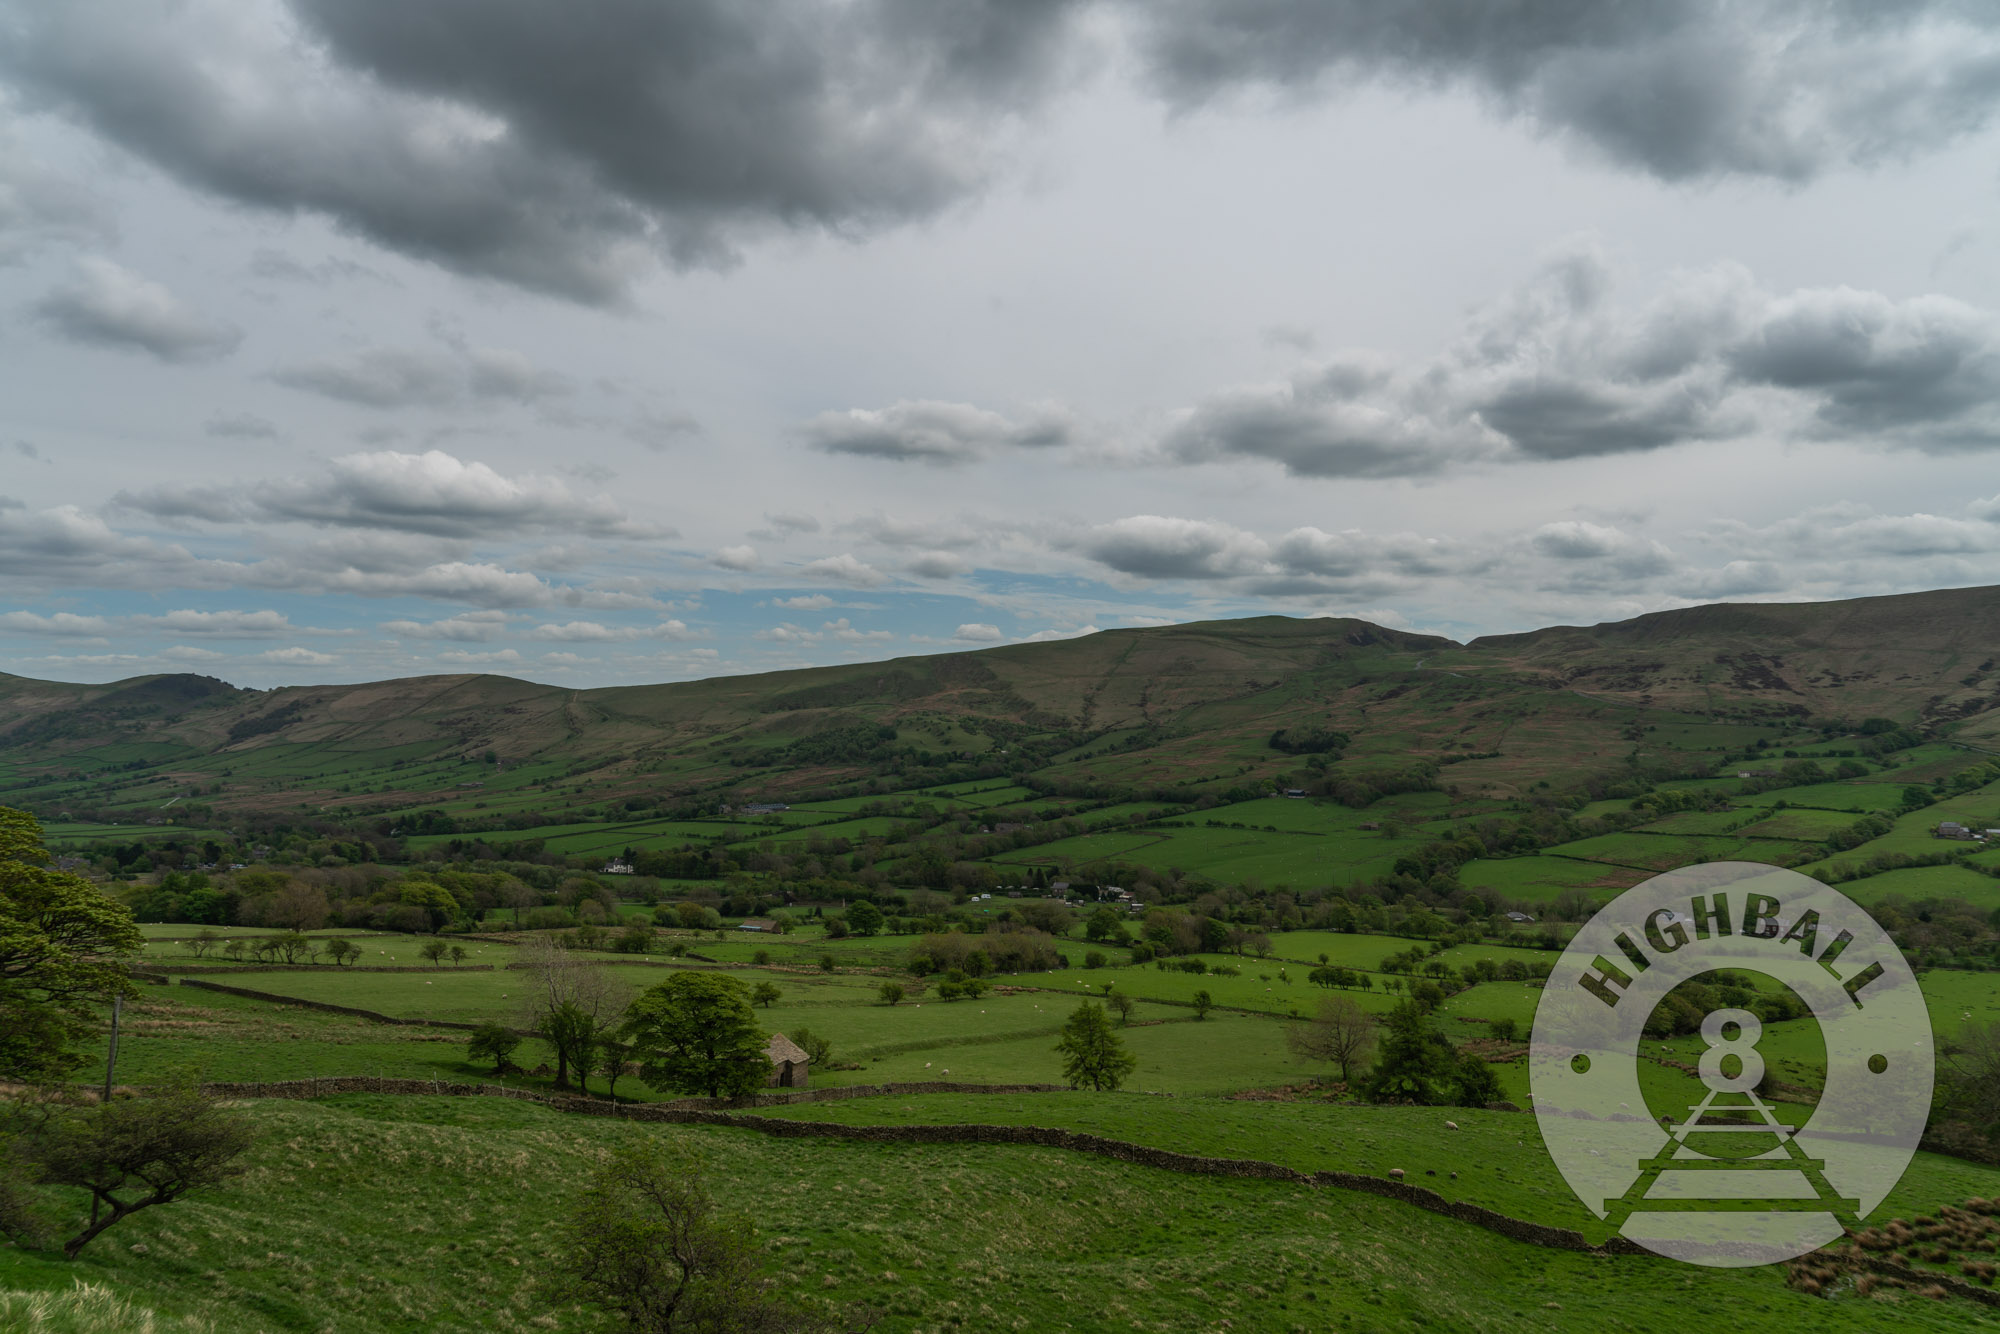 View of the Vale of Edale from the Pennine Way, Peak District, Derbyshire, England, UK, 2018.